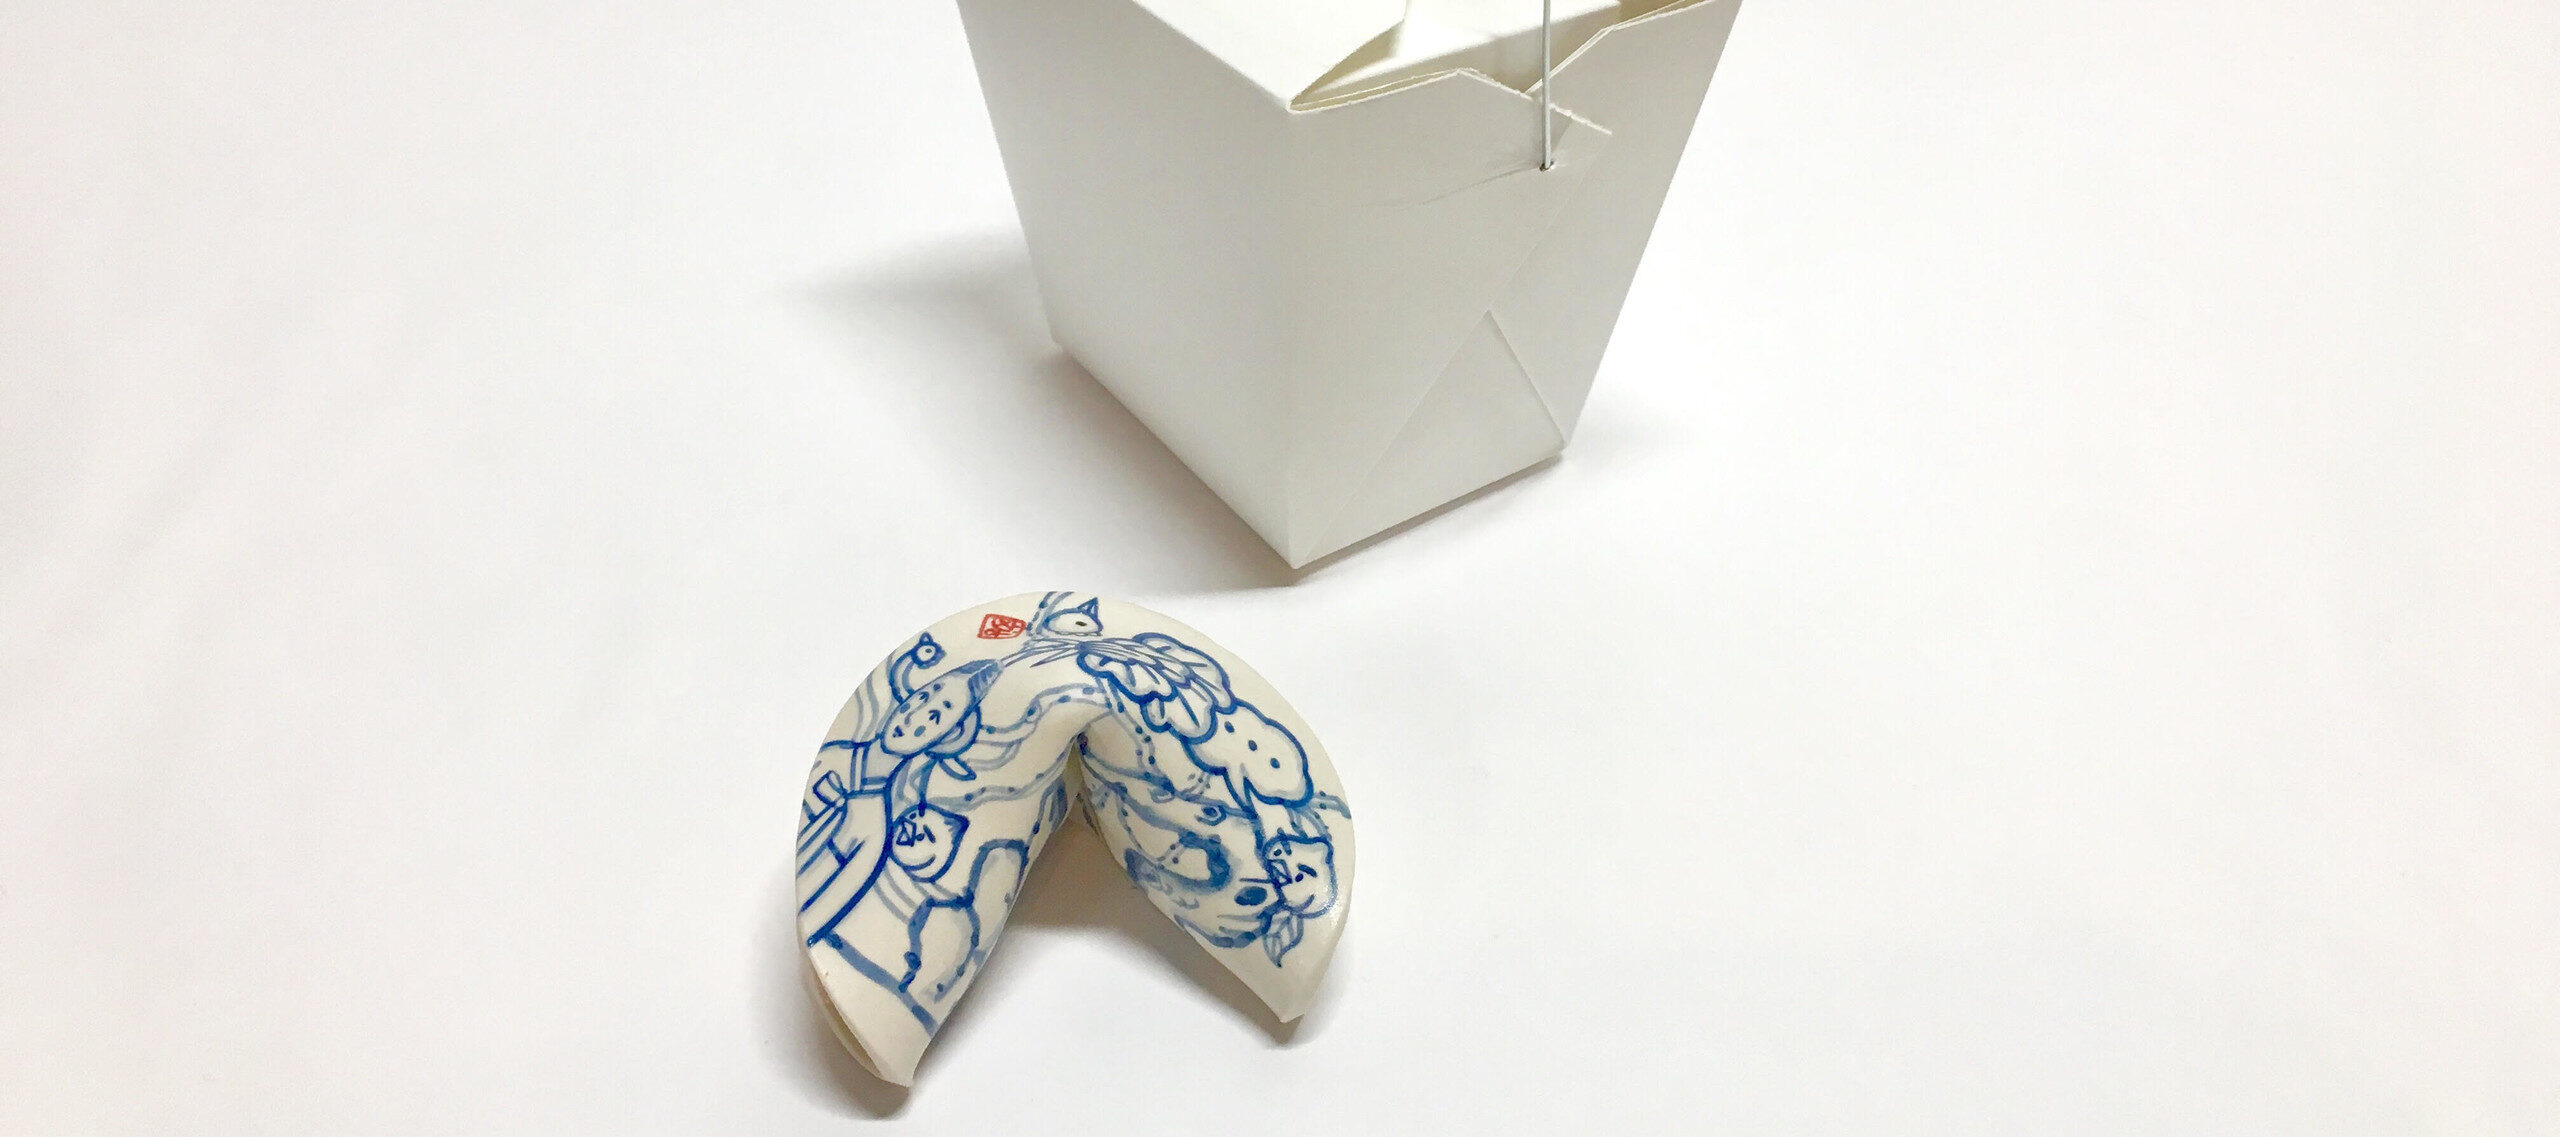 A small blue and white painted porcelain fortune cookie next to a white takeout box